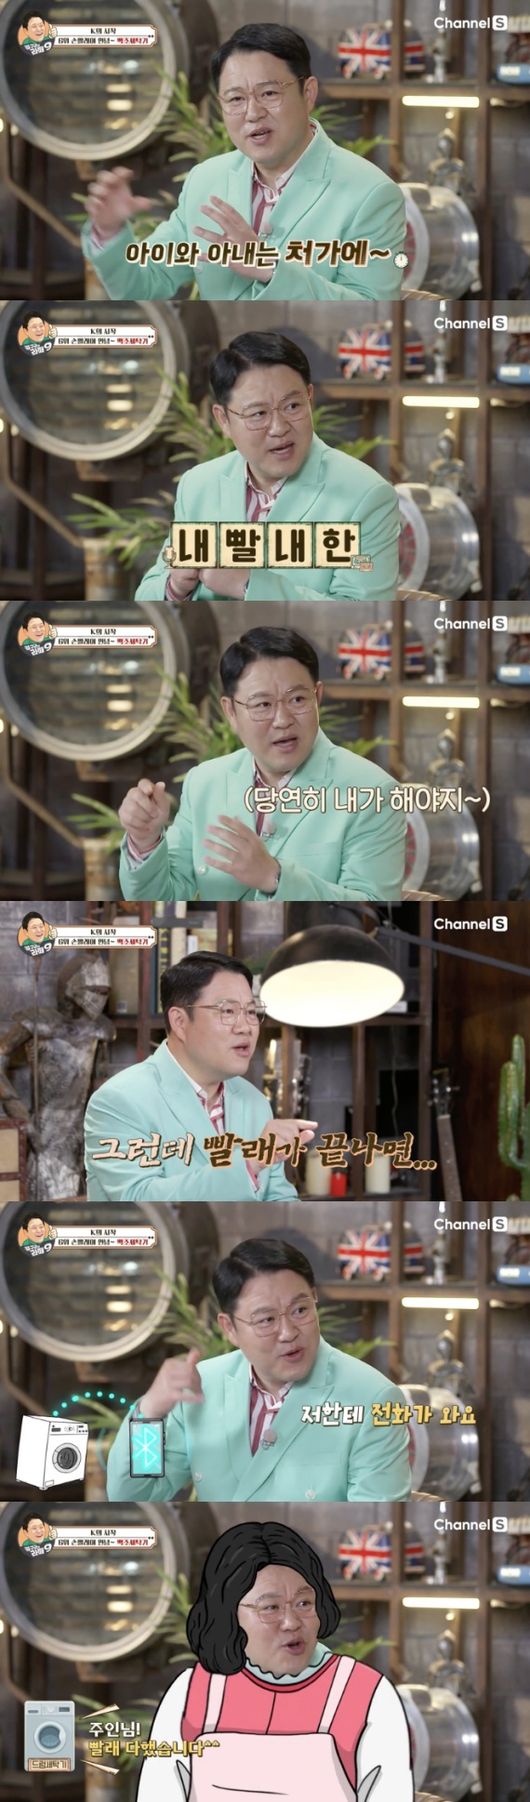 Broadcaster Kim Gura says she still lives alone after giving birth to wifeIn the third episode of Kim Guras Latte art9 (hereinafter referred to as Latte art district) broadcast on the last 4th, we invited Jun Jin as a guest and talked about the theme of Start of the Fever of K, which informed the former World of the status of Korea.My age is 80 years old, so its the last MZ generation, Jun Jin said. Its the middle bridge between the Latte art generation and the MZ generation.In Shinhwa, except for me and Andy, it is Latte art. In earnest, Kim Gura and Jun Jin have discussed the points that all worlds are enthusiastic about, including the first K cars, culture, and home appliances.While talking about the Korean Wave girl group Kim Sisters, which was born in 1953, Kim Gura said, Elvis Presley asked Kim Sook-ja for a date, but his mother, who was a producer, did not meet him.Jun Jin, who listened to this, said, If your mother did not object, you might have been marriage (I will). Kim Gura said, If you did, you would be an else.If you did not have an eyelid surgery, you might have a lot of wrinkles because you opened your eyes, Jun Jin said, referring to the past cool double eyelid surgery.Im sure hes had several surgeries in a few years.In addition, while talking about the washing machine, which was a revolutionary invention in the past, Kim Gura said that his wife and child who are remarried are in his wifes house and wash themselves at home.My washing machine and my wifes smartphone are linked, so when the laundry is done, the phone comes in, Honey, Im done with the laundry, so Im going to have to hang up.There are all kinds of things, he said, expressing surprise to the world that developed.The two talked about the late Andre Kim, and Jun Jin said, I met my teacher at the beginning of the Shinhwa activity, and then I saw me and said, Good to see you, Jun Jin.I felt strange to know my name. Kim Gura also said, I used to go to a store with my son, and he praised the child as a genius.Donghyun has adjusted his clothes and still keeps them. Kim Guras Latte art9 broadcast capture screen